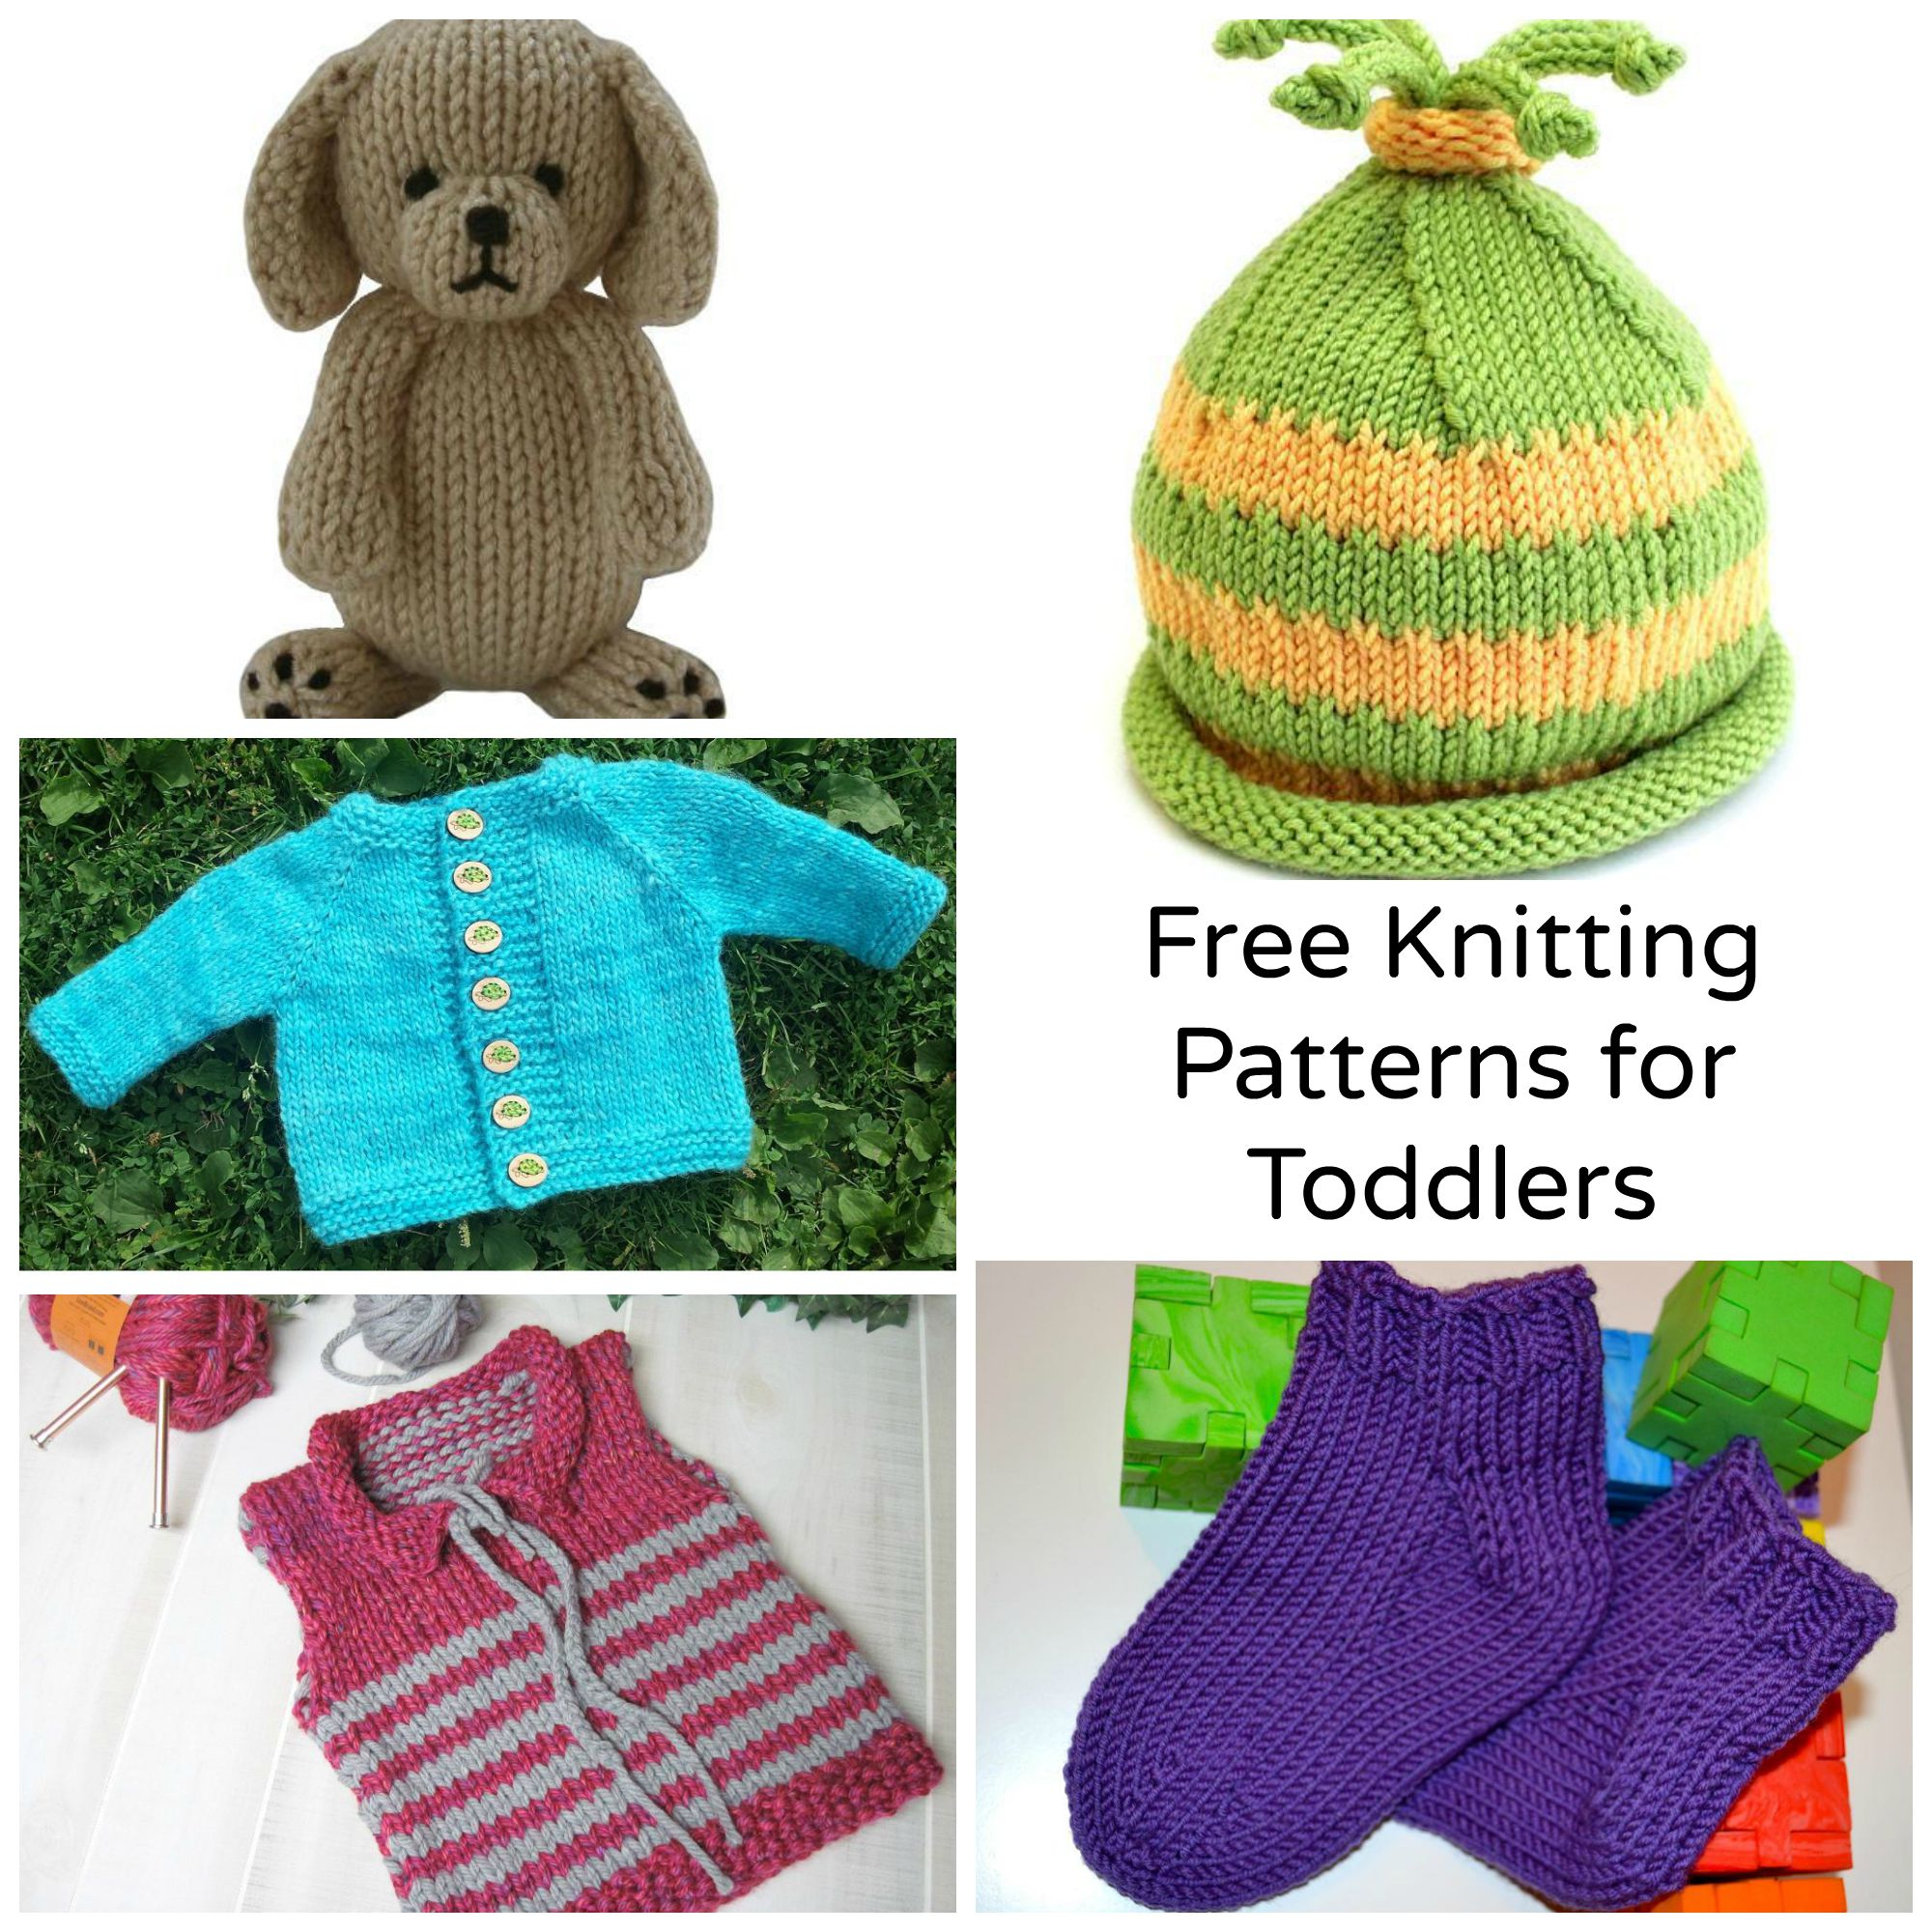 Free Baby Knitting Pattern 7 Sweet Free Knitting Patterns For Toddlers Craftsy